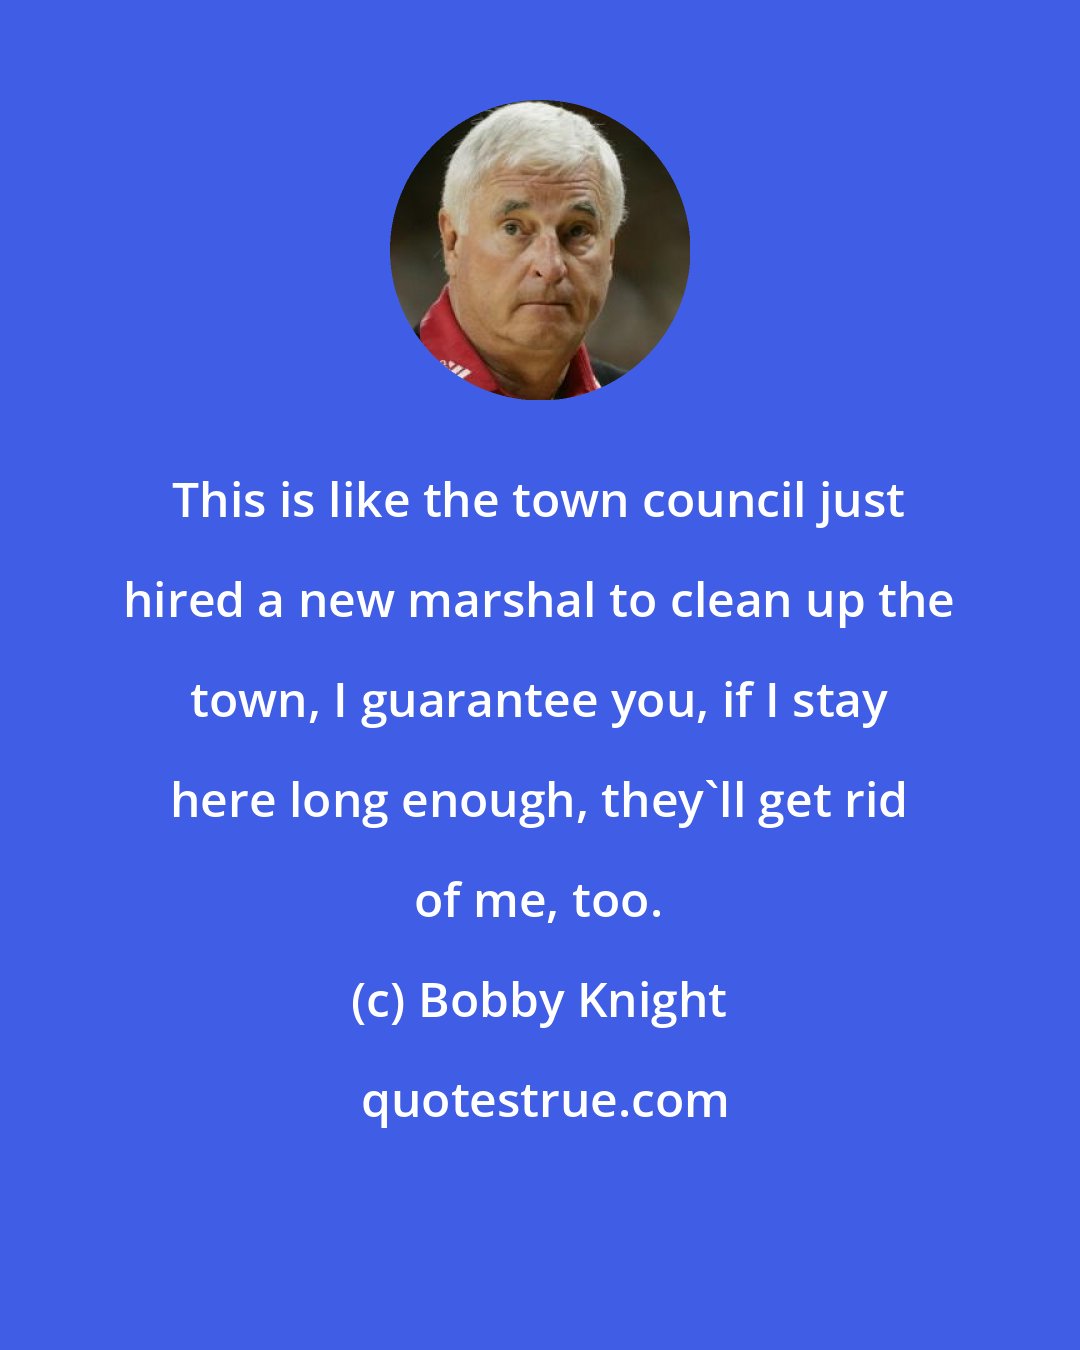 Bobby Knight: This is like the town council just hired a new marshal to clean up the town, I guarantee you, if I stay here long enough, they'll get rid of me, too.